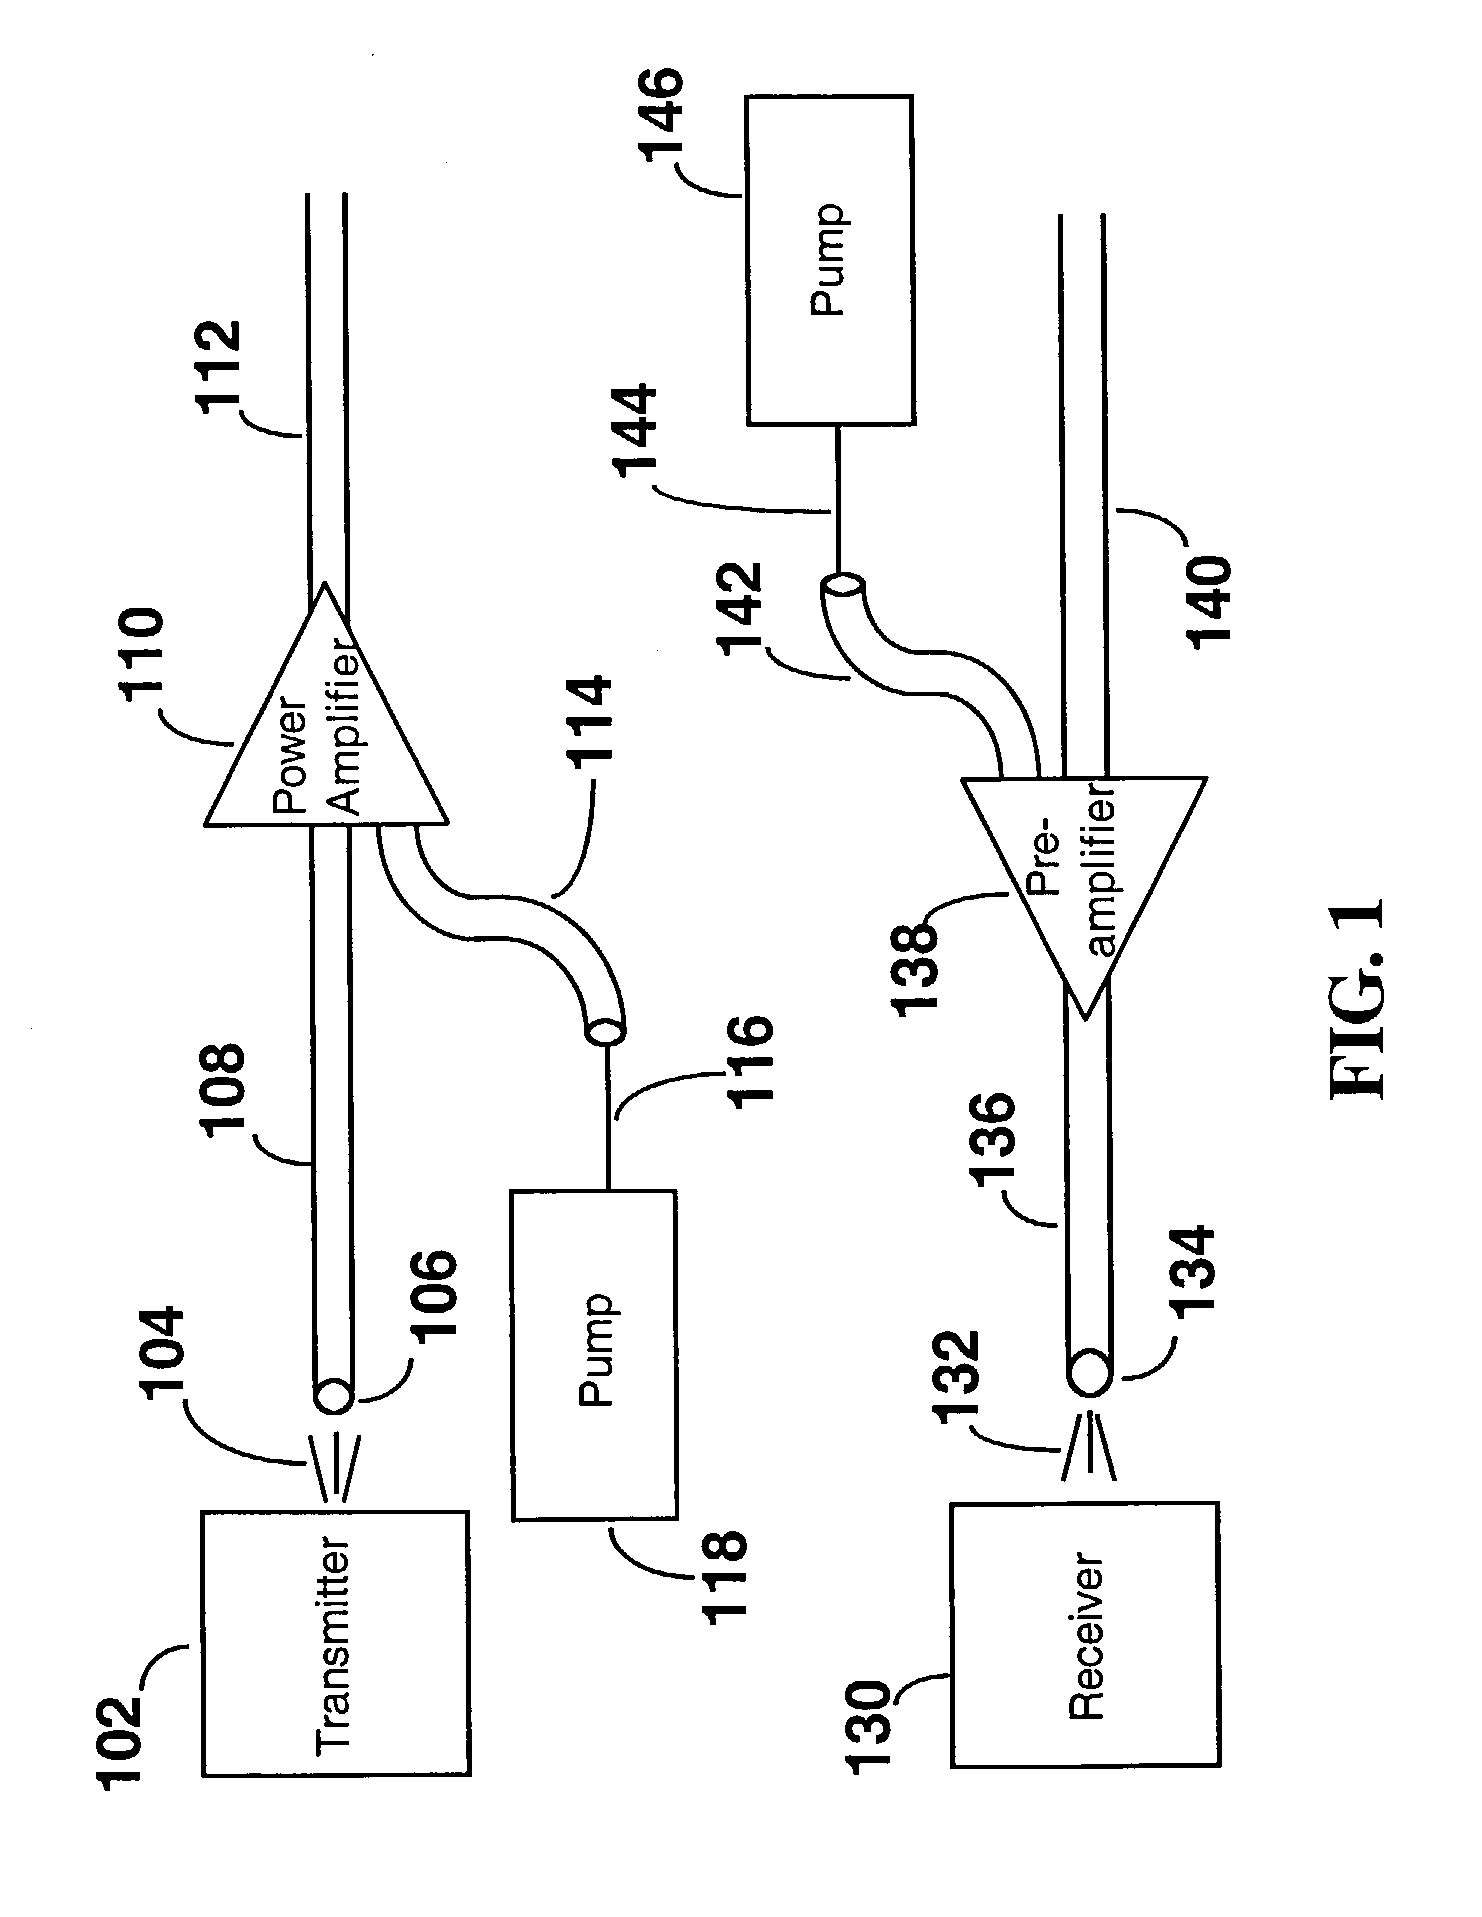 Dual fiber optic amplifier with shared pump source